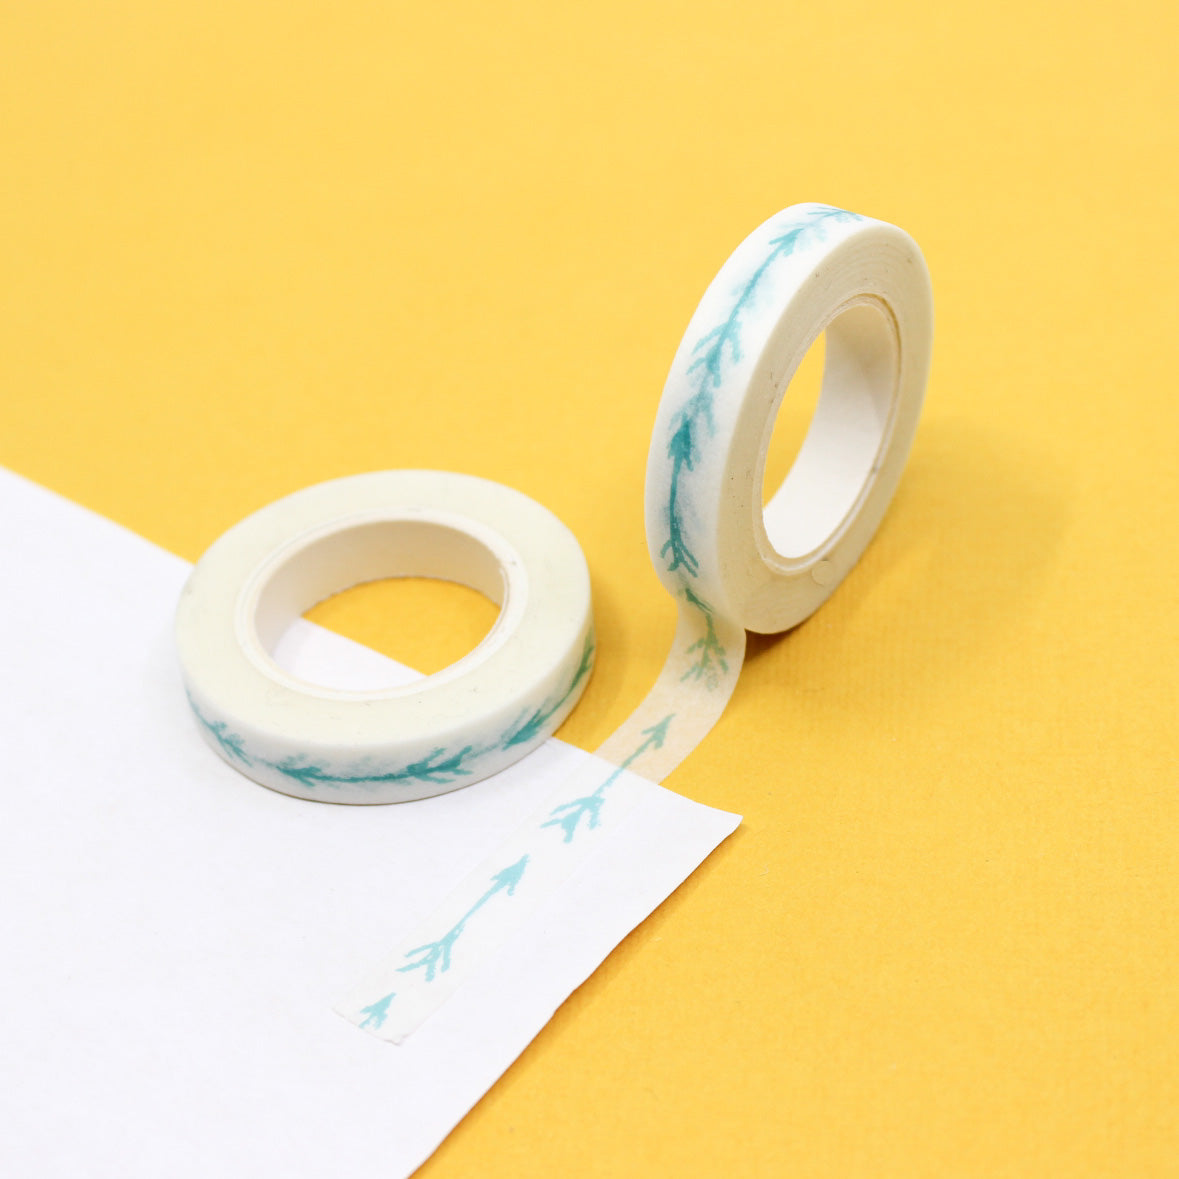 Enhance your projects with our Blue Arrow Border Washi Tape, featuring stylish and directional arrow designs in a cool blue hue. Ideal for adding a touch of precision and style to your crafts. This tape is sold at BBB Supplies Craft Shop.